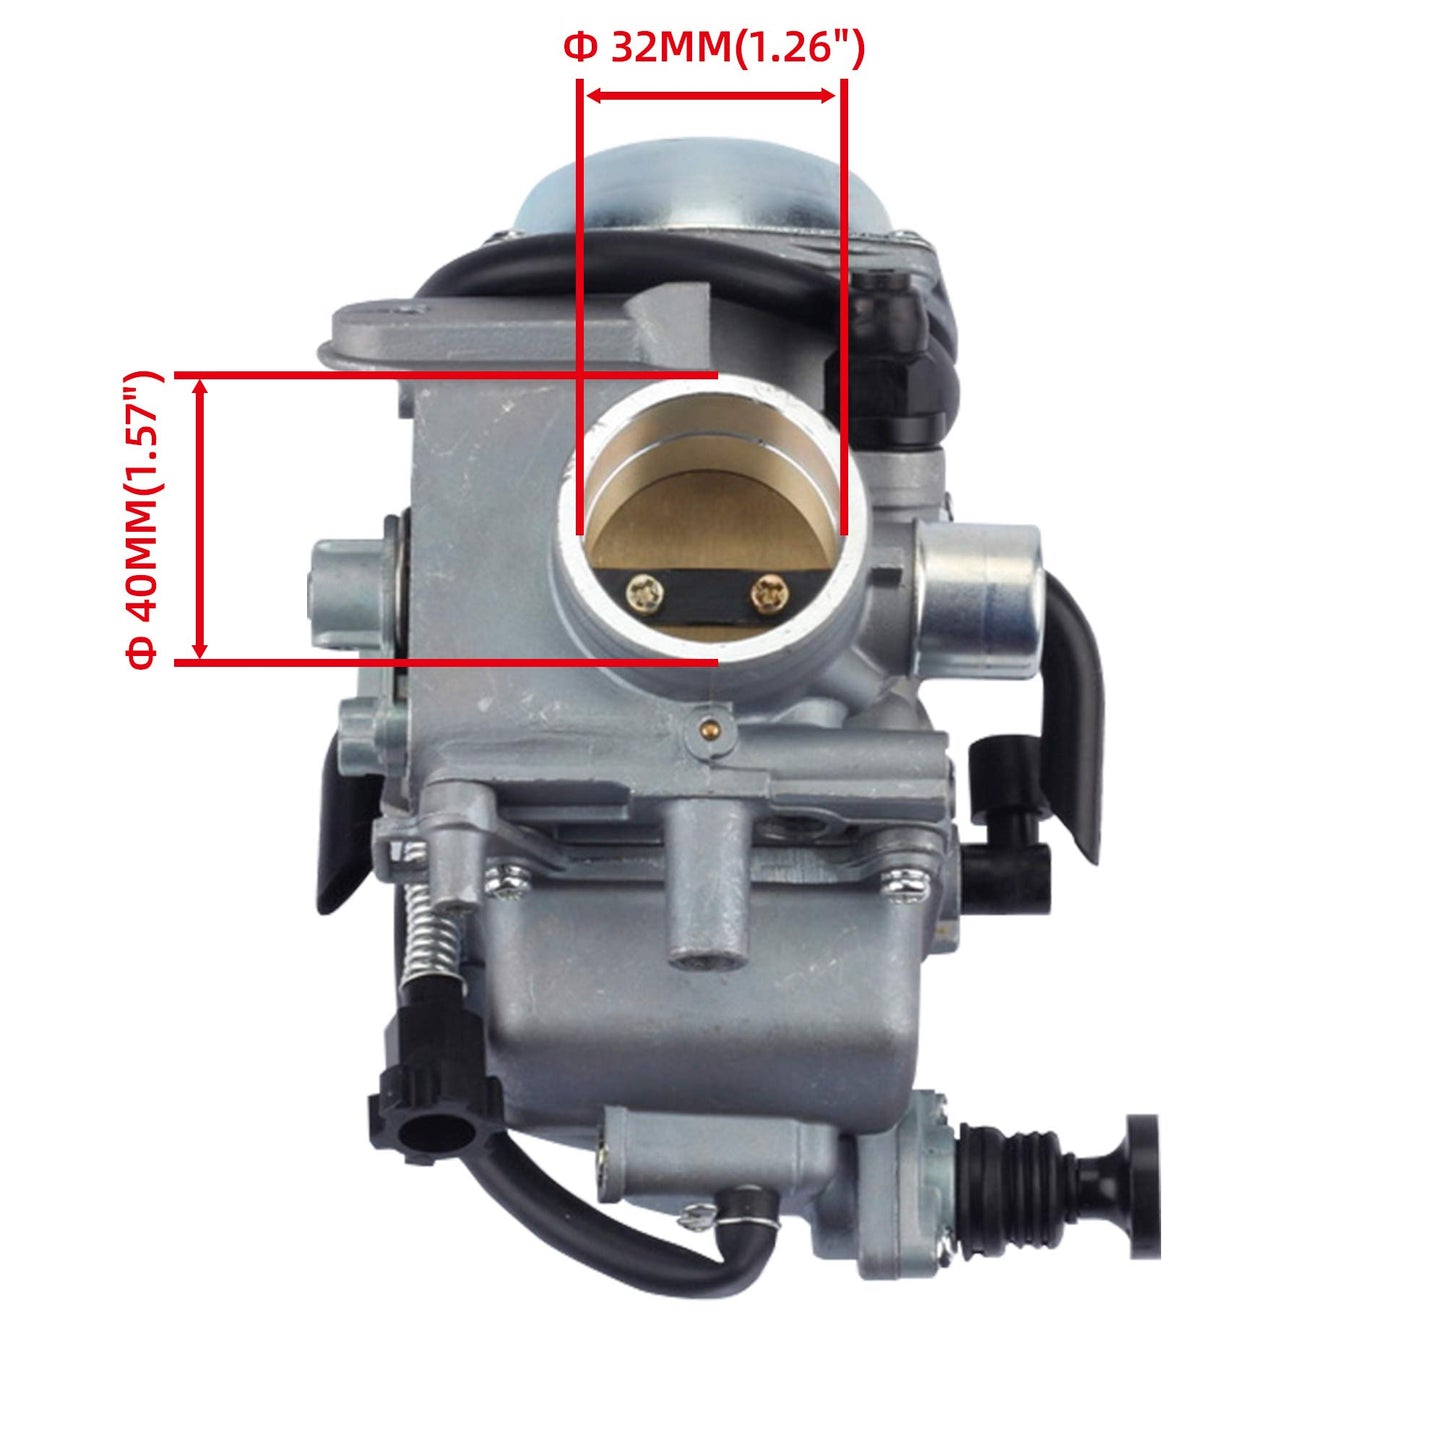 Honda Rancher 350 2000-2006 Foreman 450 1998-2004 Foreman 400 1997-2003 Fourtrax 350 1986-1987 Fourtrax 300 1993-2000 Carburetor with Oil/Air Filter - Dasbecan